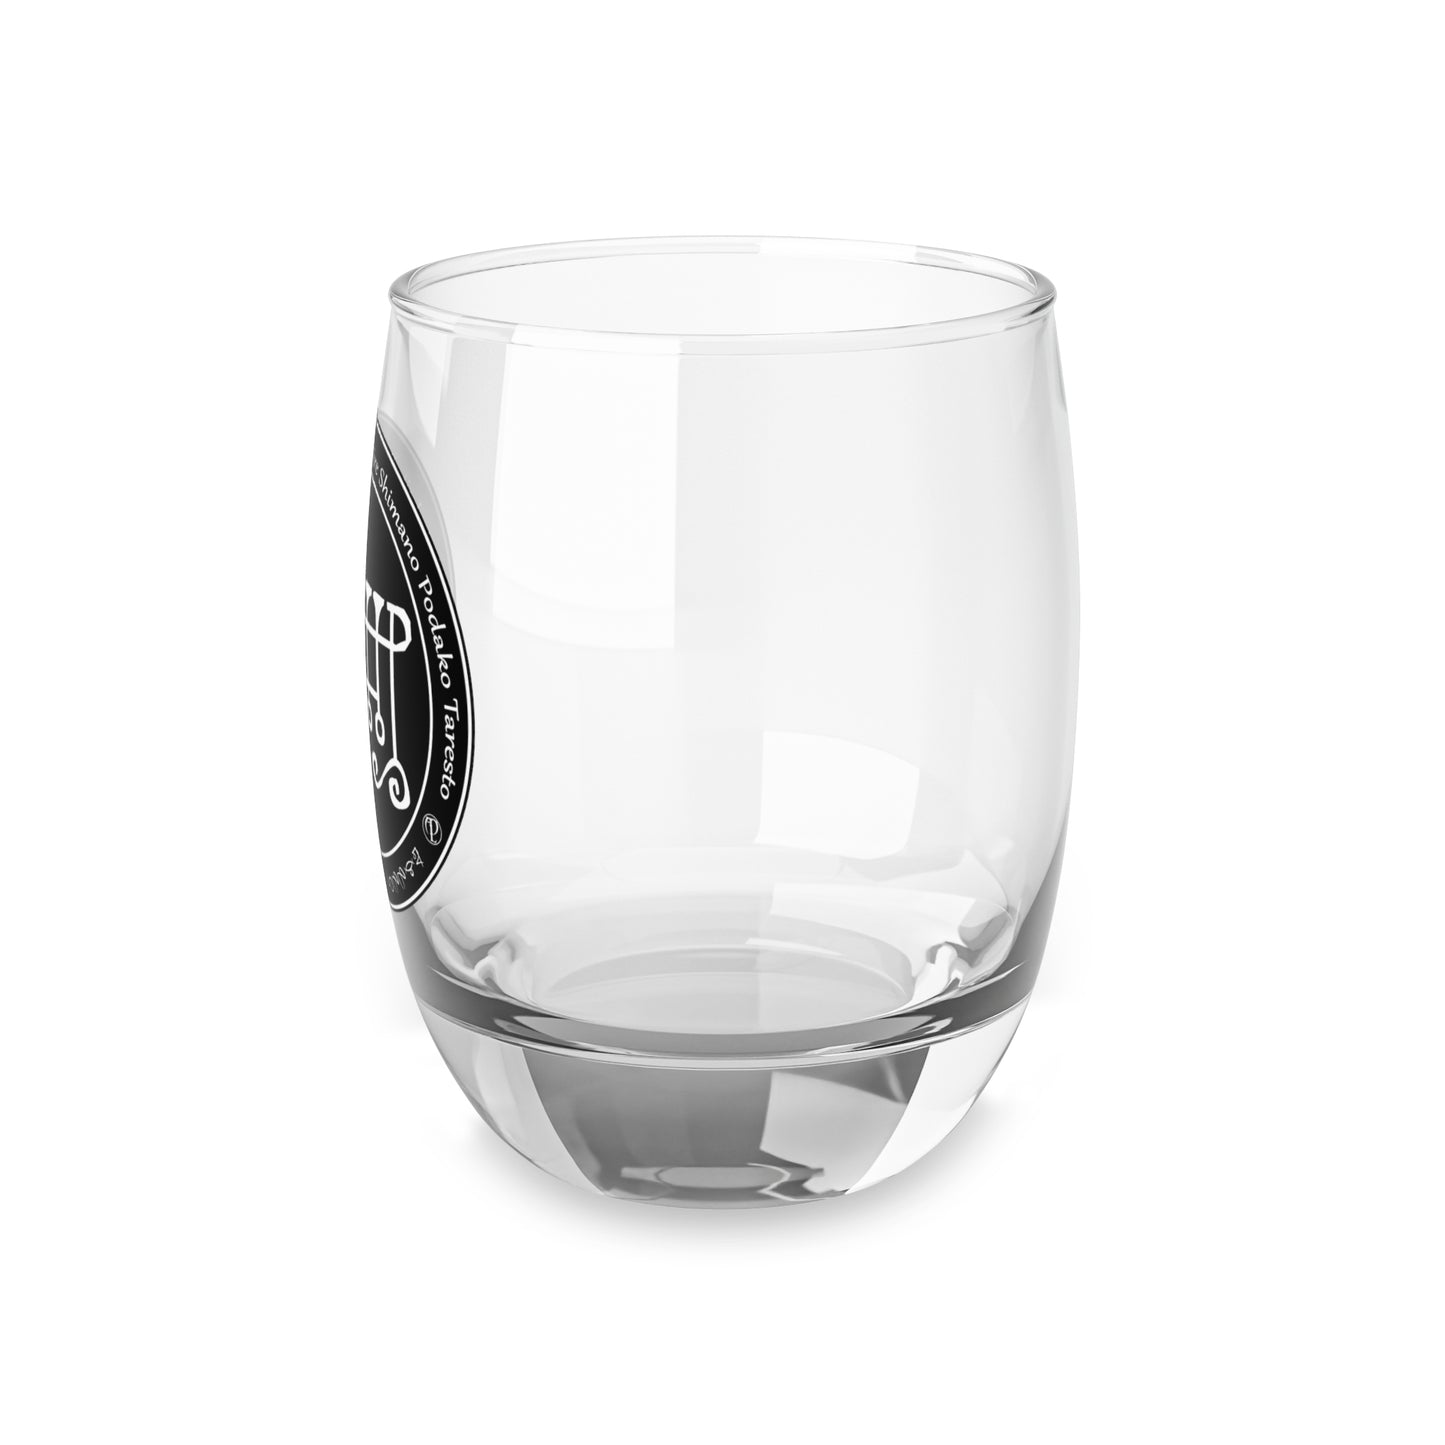 Gusion Sigil Engraved Crystal Offering Glass